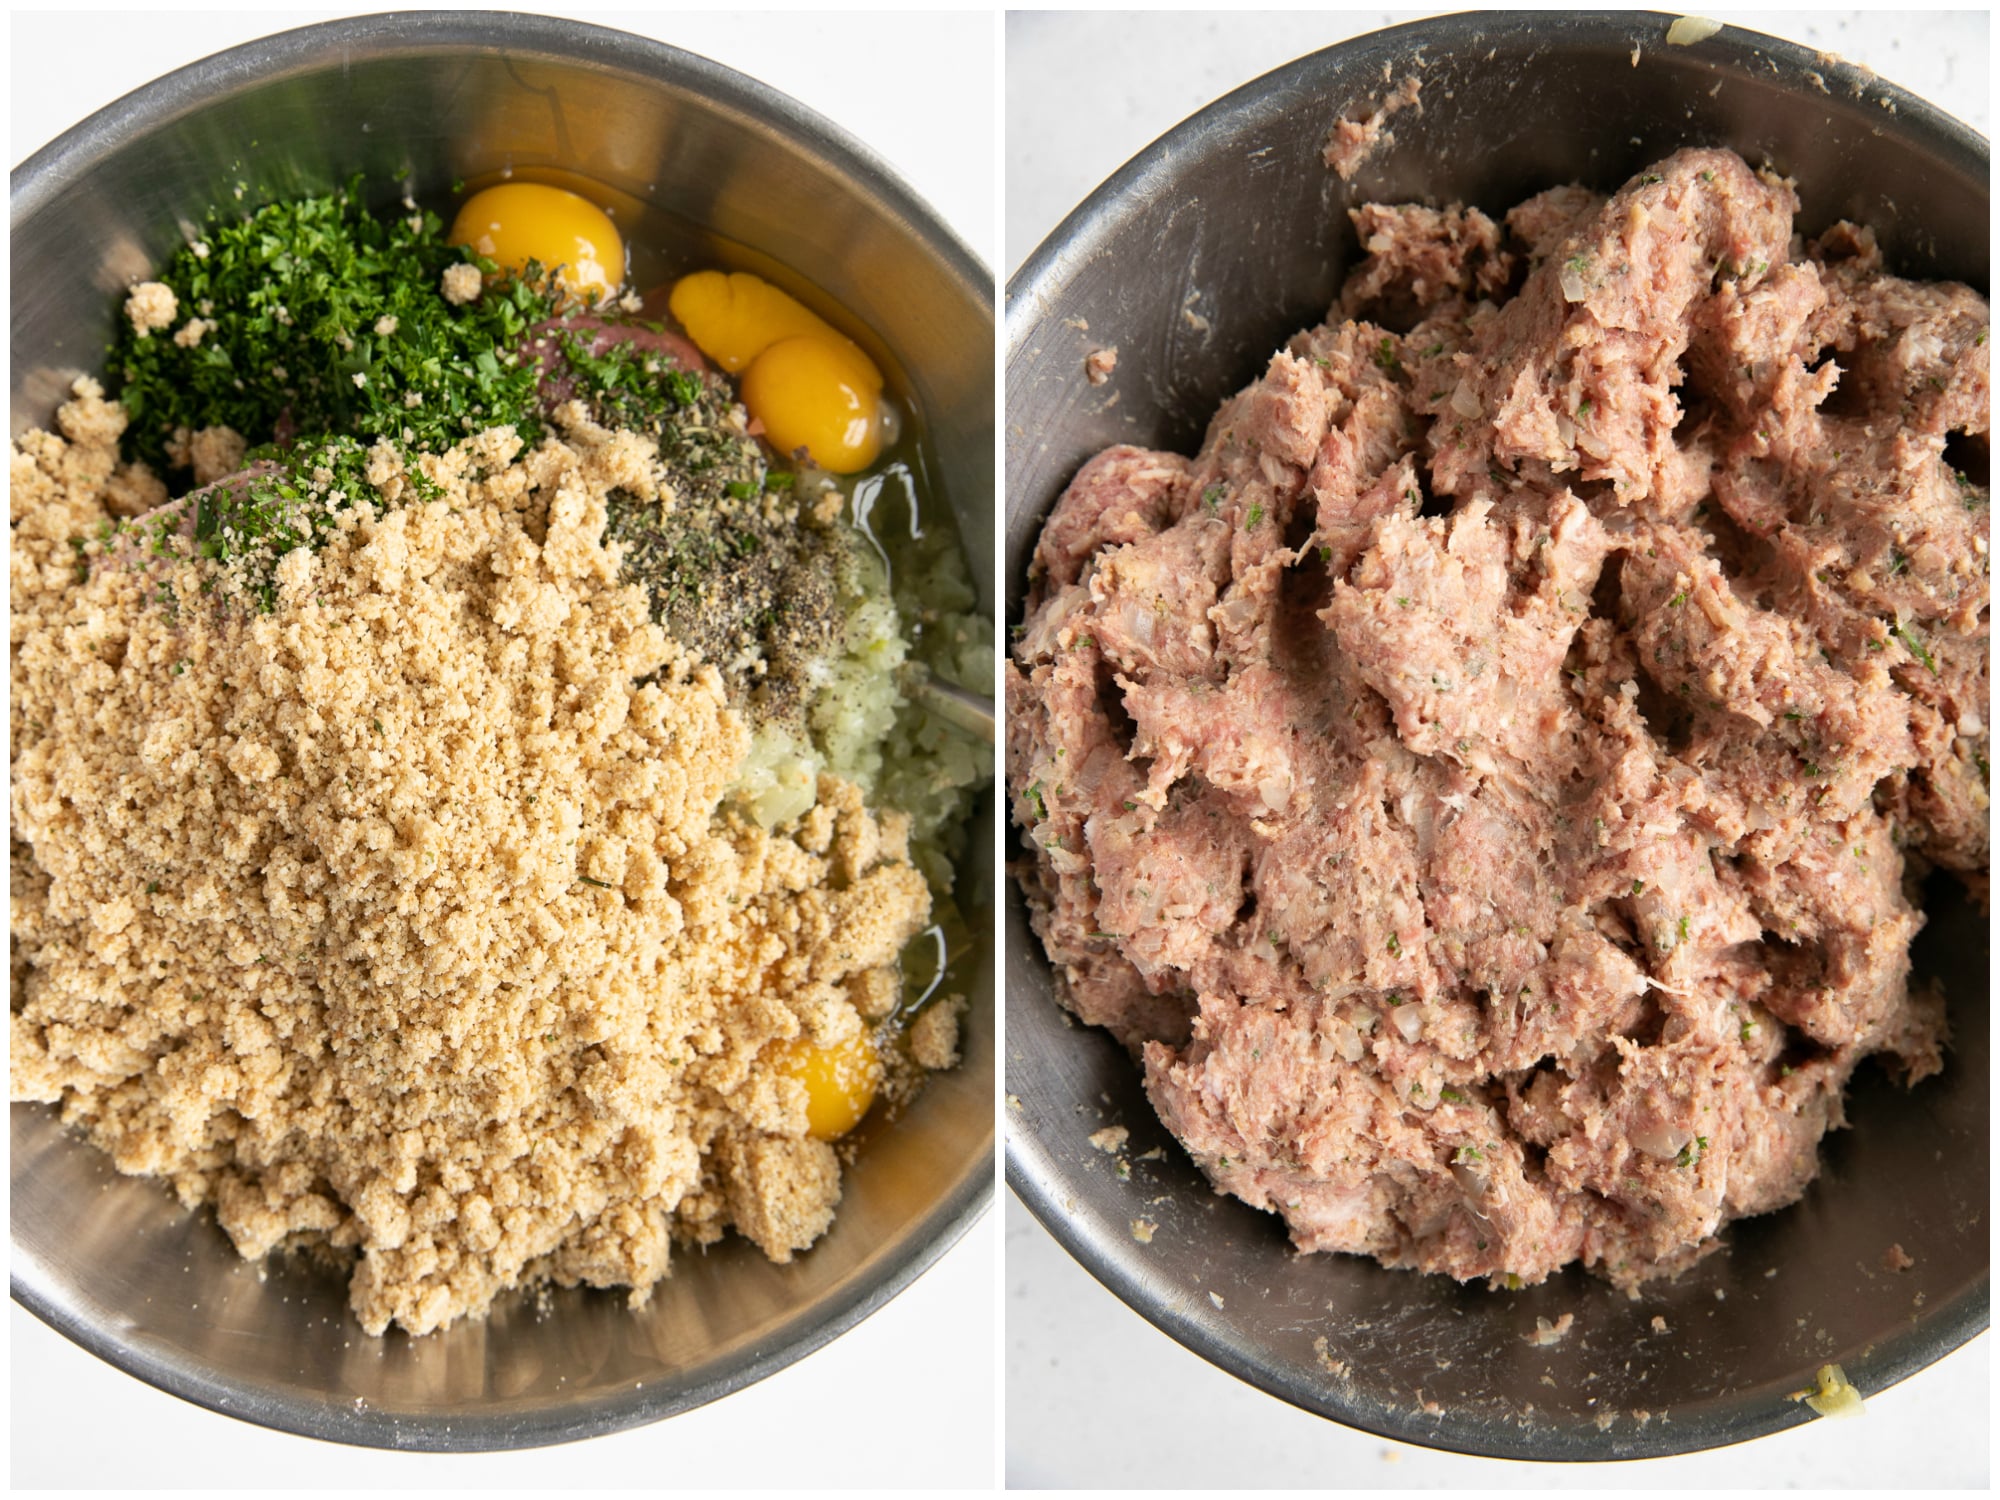 Collaged image: meatball ingredients in a large mixing bowl on the left and mixed together ingredients on the right.